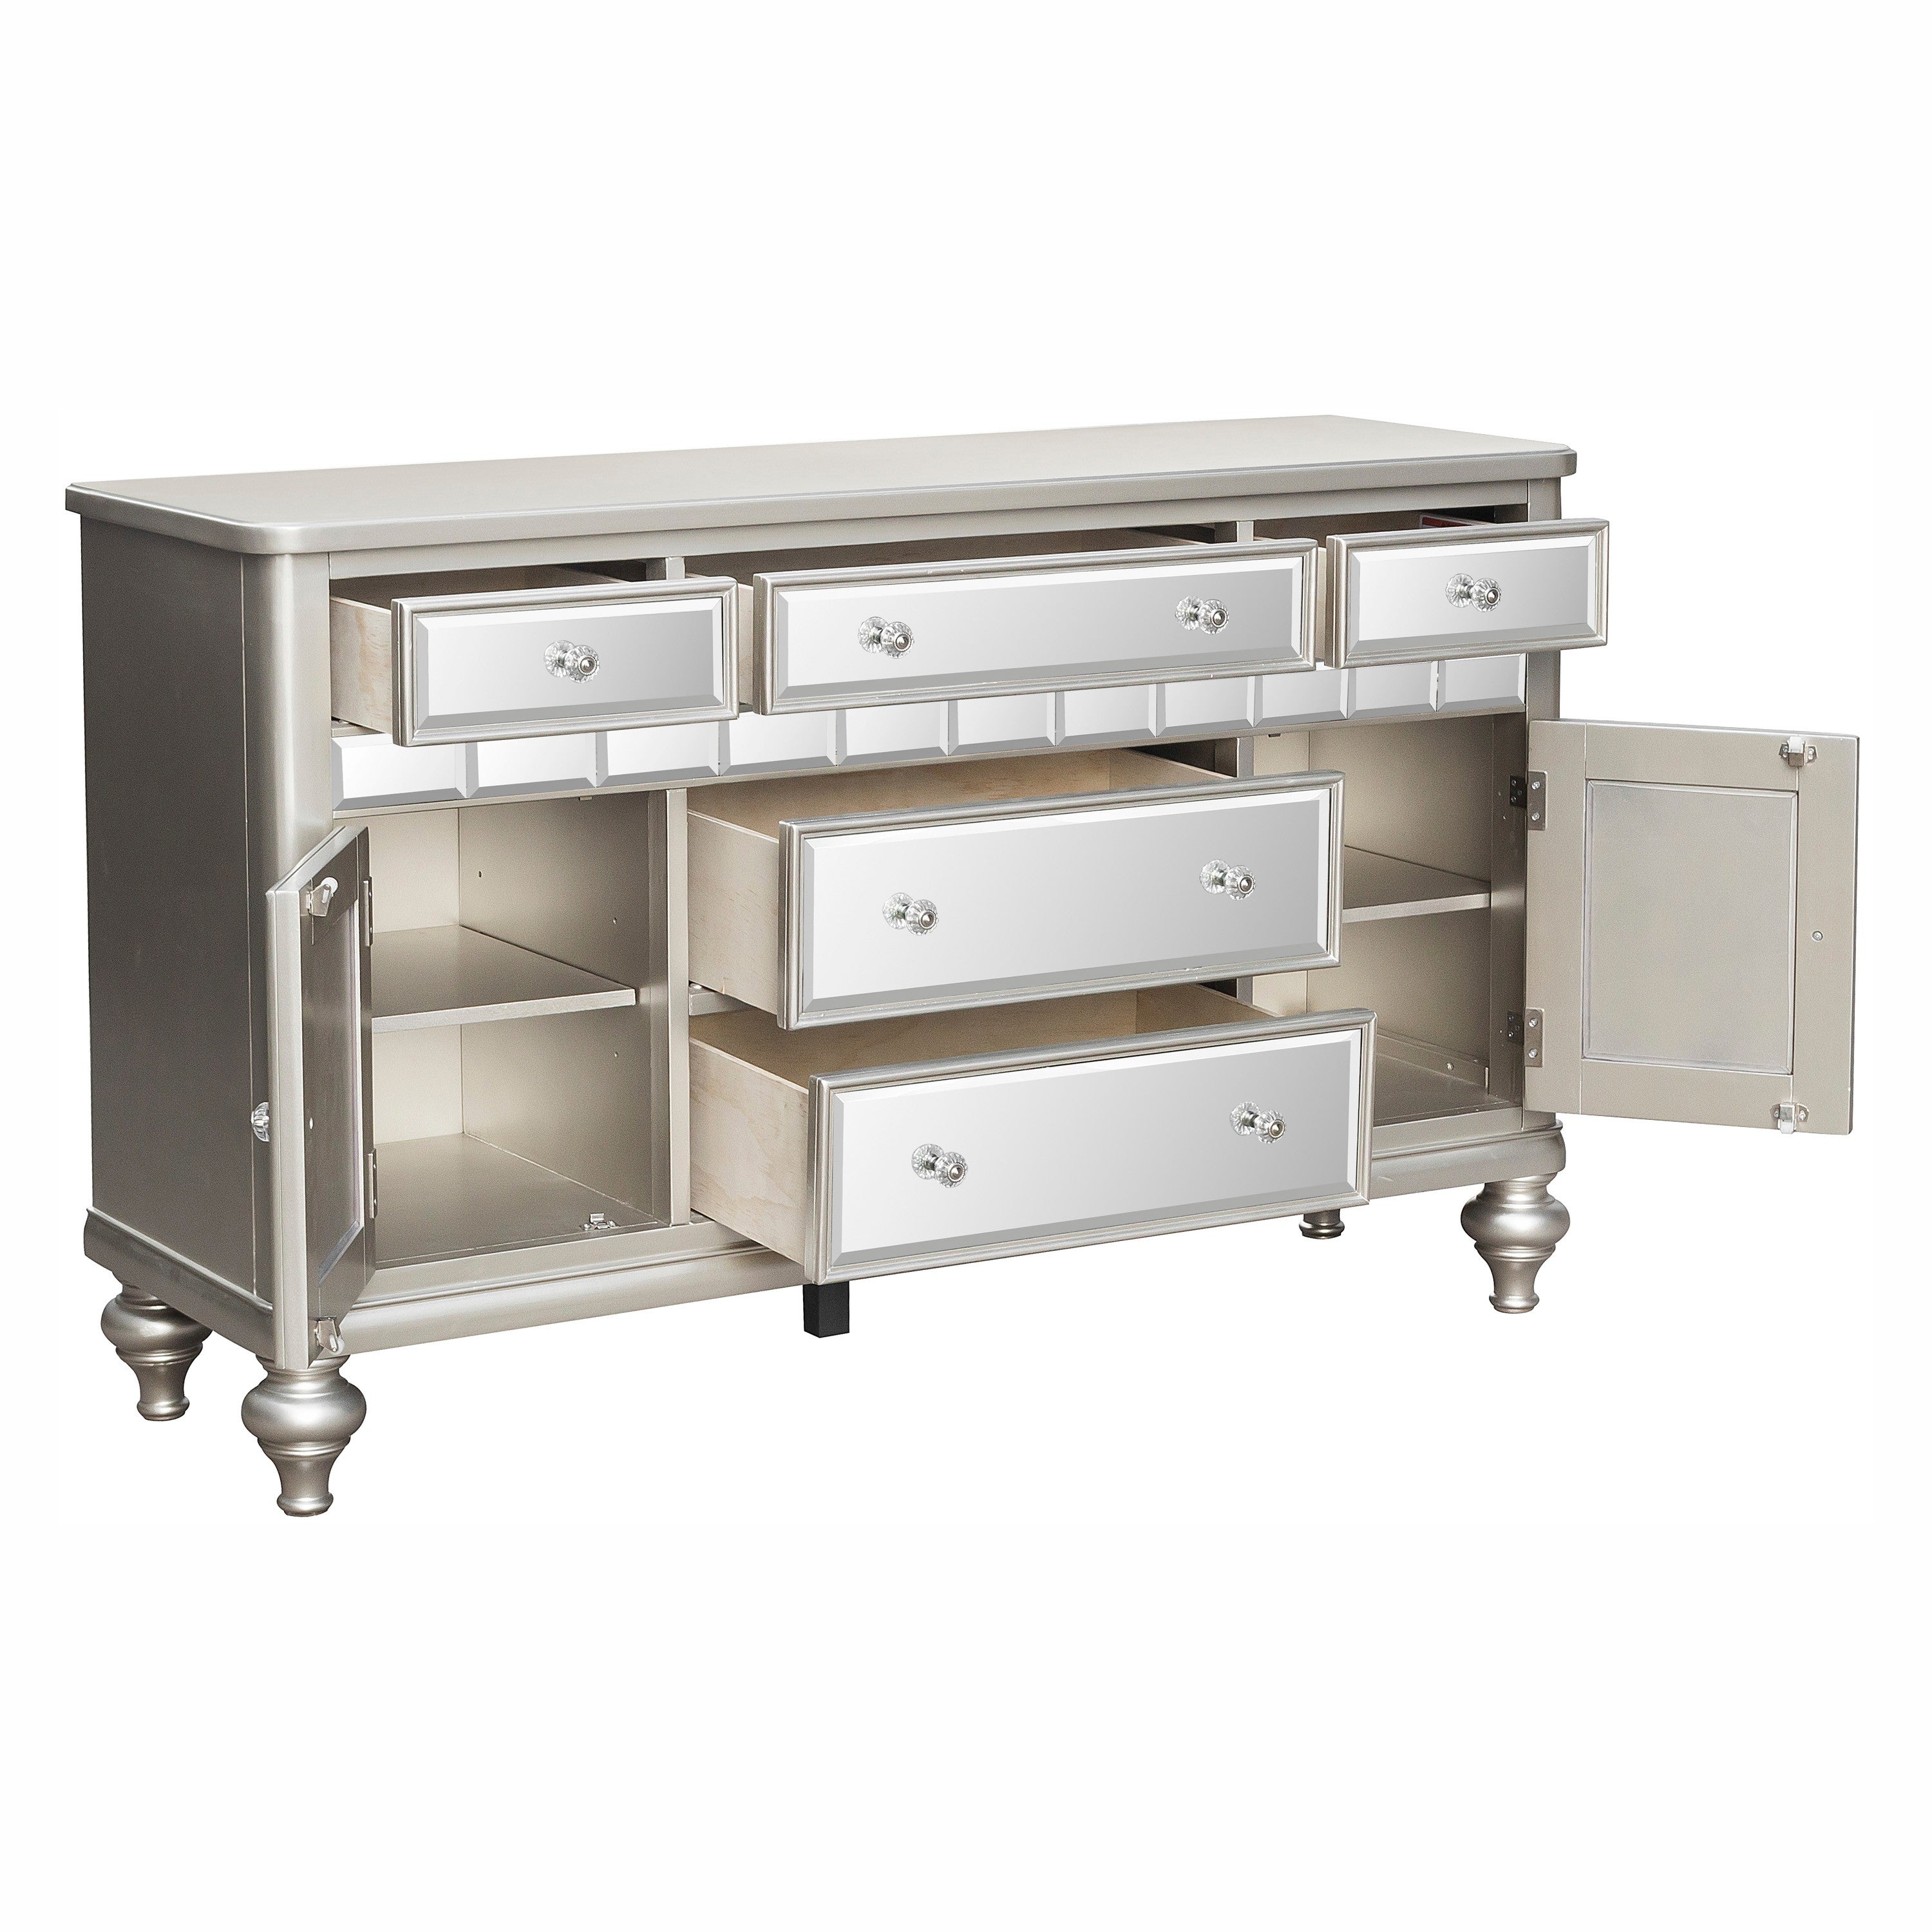 Orsina Dining Collection 5477N